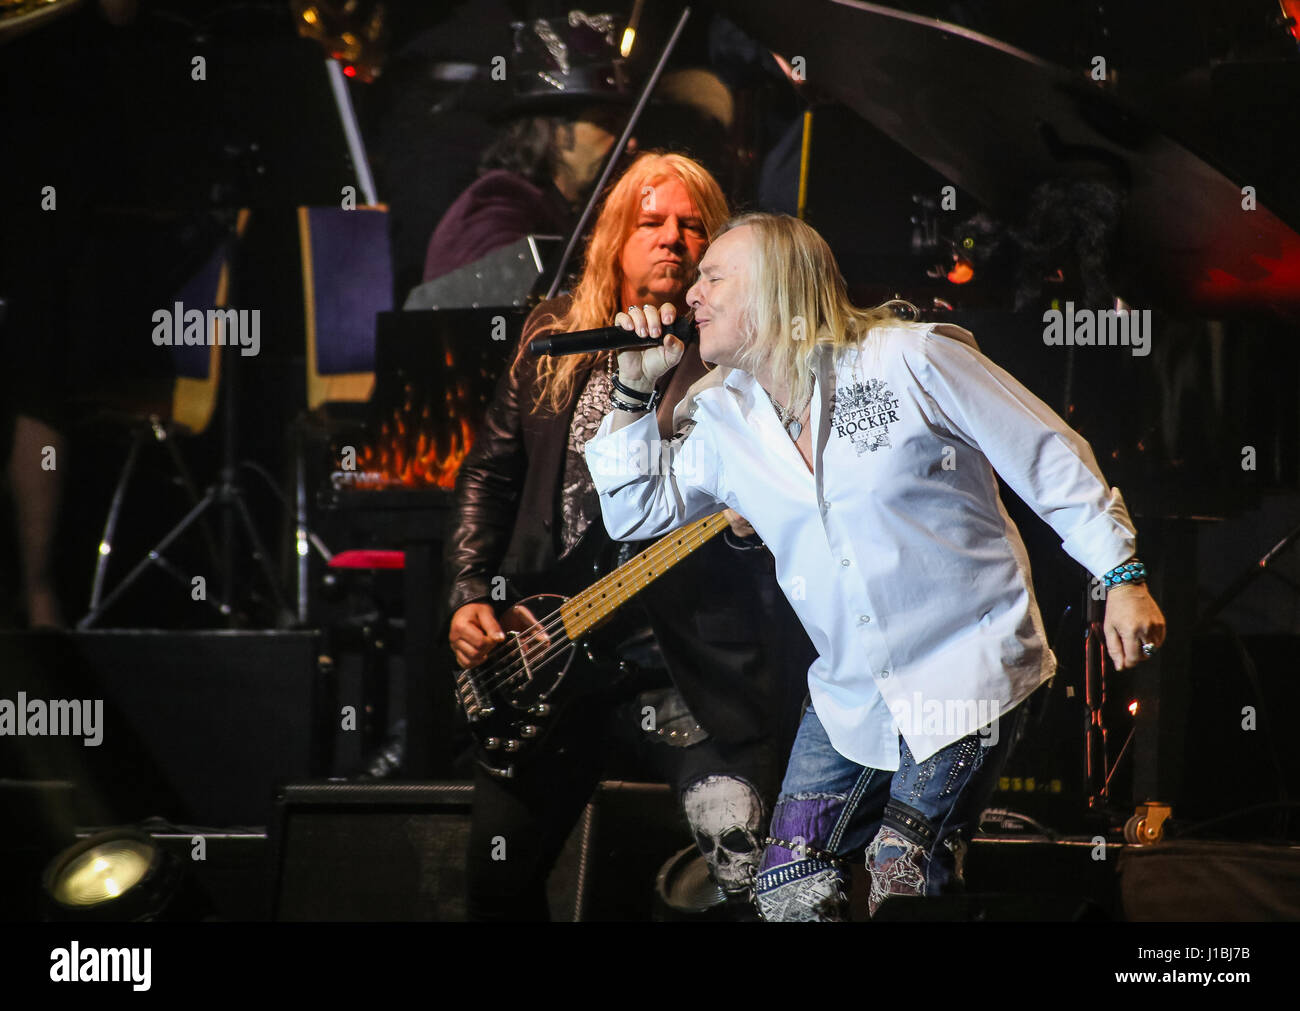 Wetzlar, Germany, 13th April, 2017. Bernie Shaw, singer of british hard rock band Uriah Heep, performs at Rock meets Classic 2017, concert show with rock legends as soloists, accompanied by Mat Sinner Band and Bohemian Symphony Orchestra Prague. Venue: Rittal-Arena, Wetzlar, Germany. Fotocredit: Christian Lademann Stock Photo